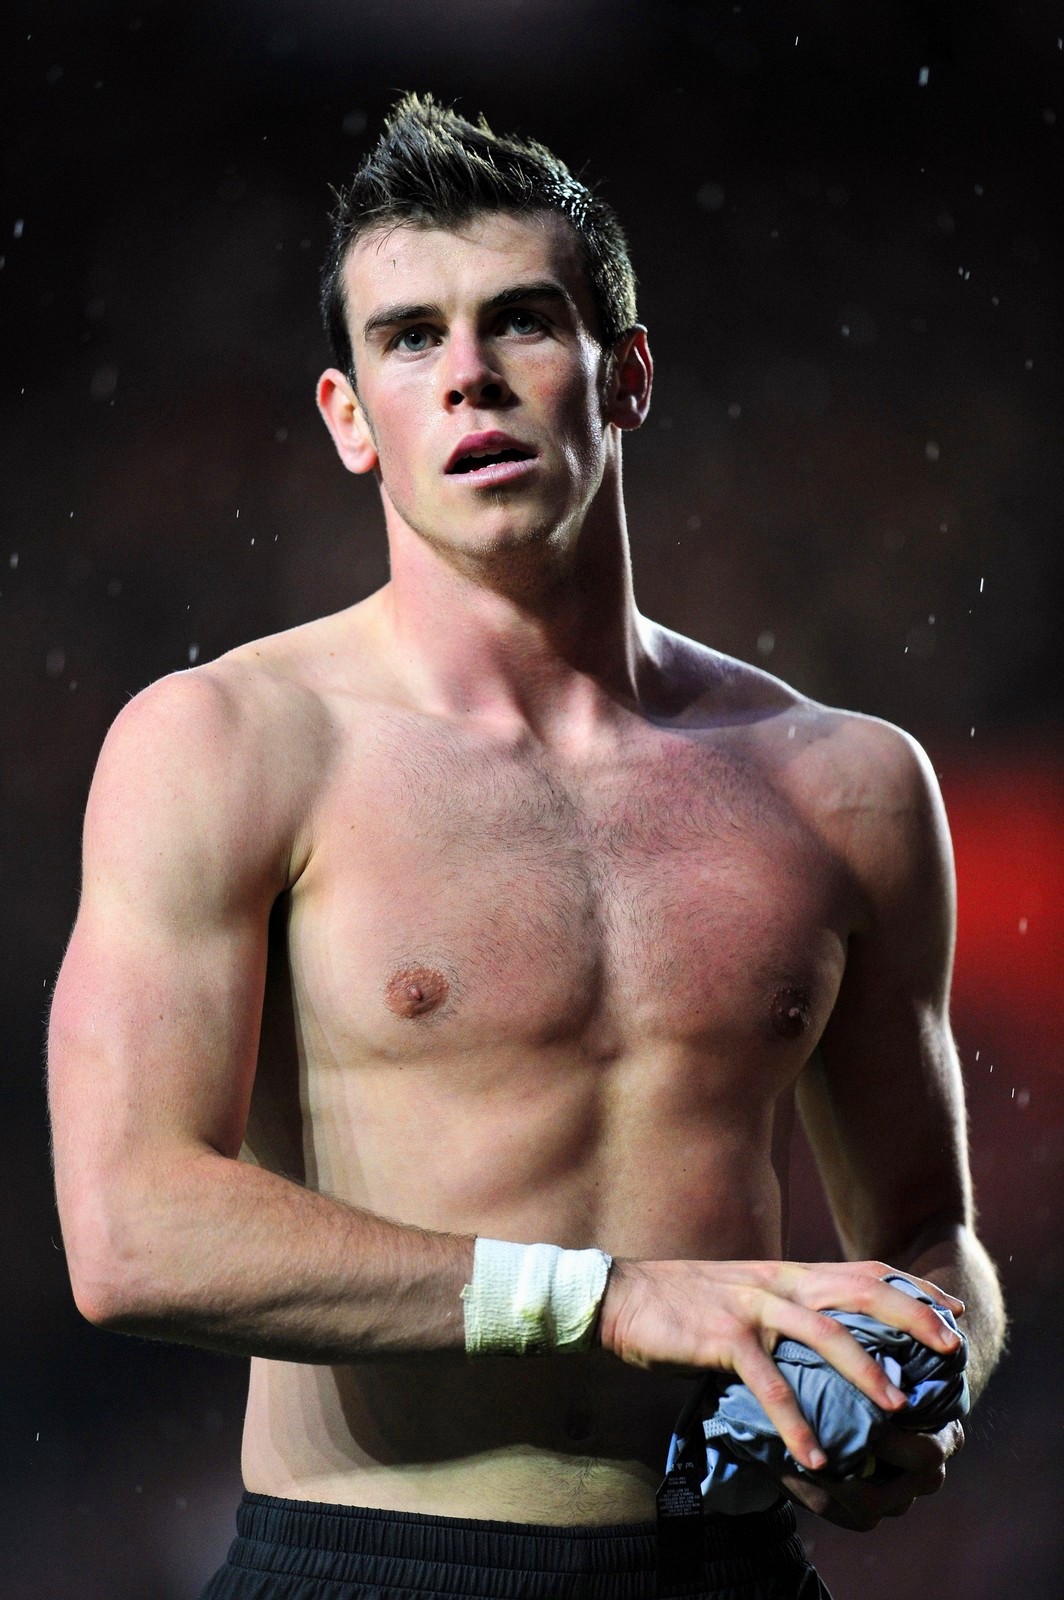 The Stars Come Out To Play Gareth Bale Shirtless Video And Pics